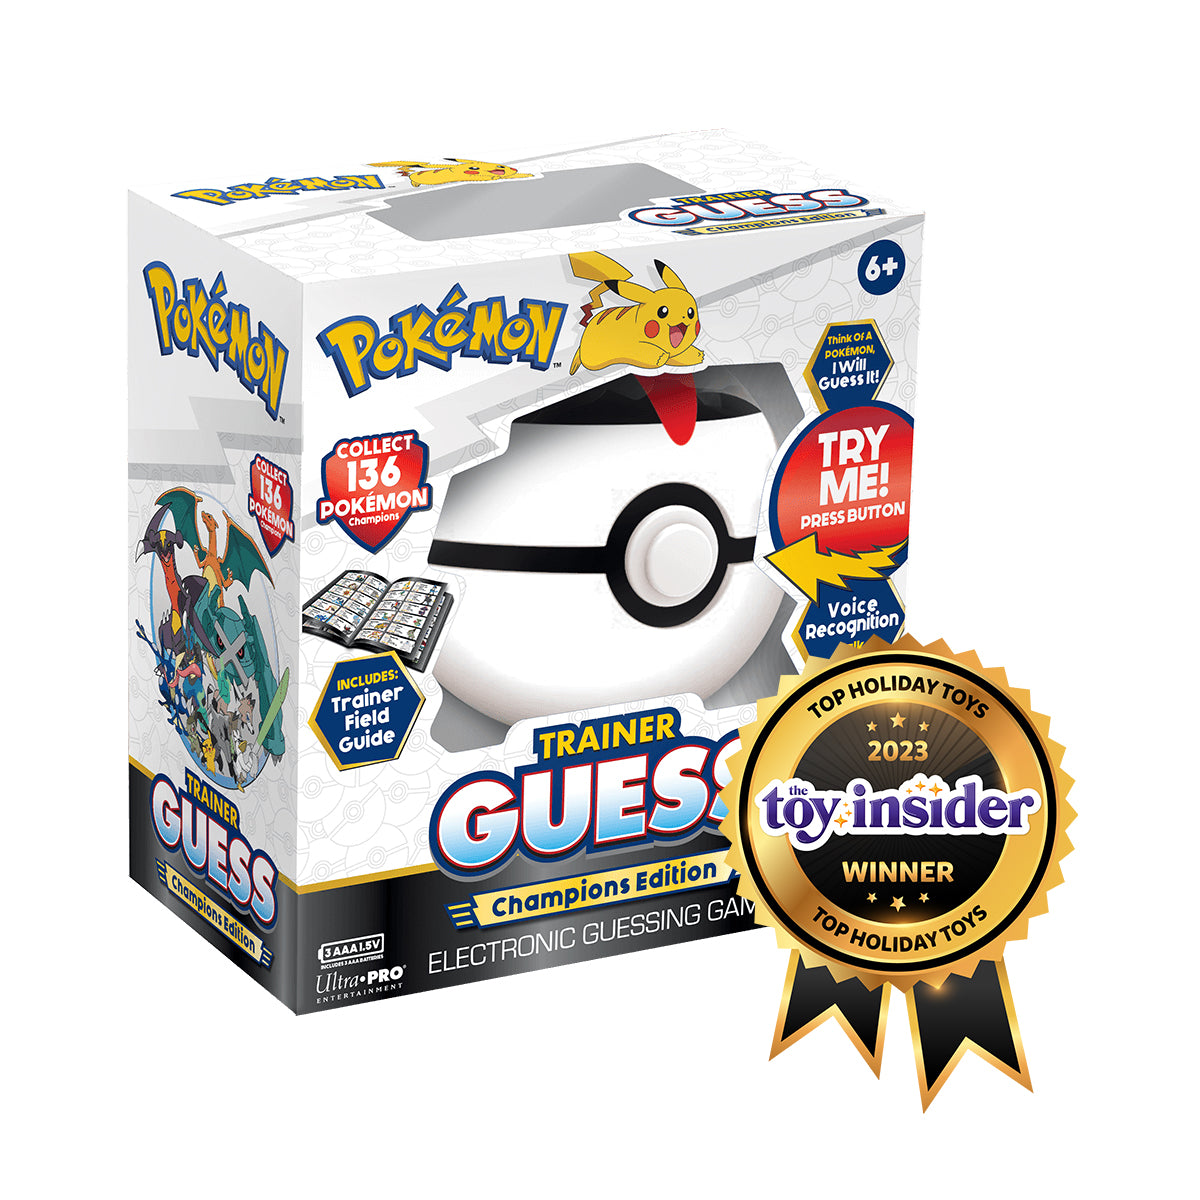 Ultra PRO’s Pokémon Trainer Guess: Champions Edition Electronic Game Wins Toy Insider’s Top Holiday Toy Award